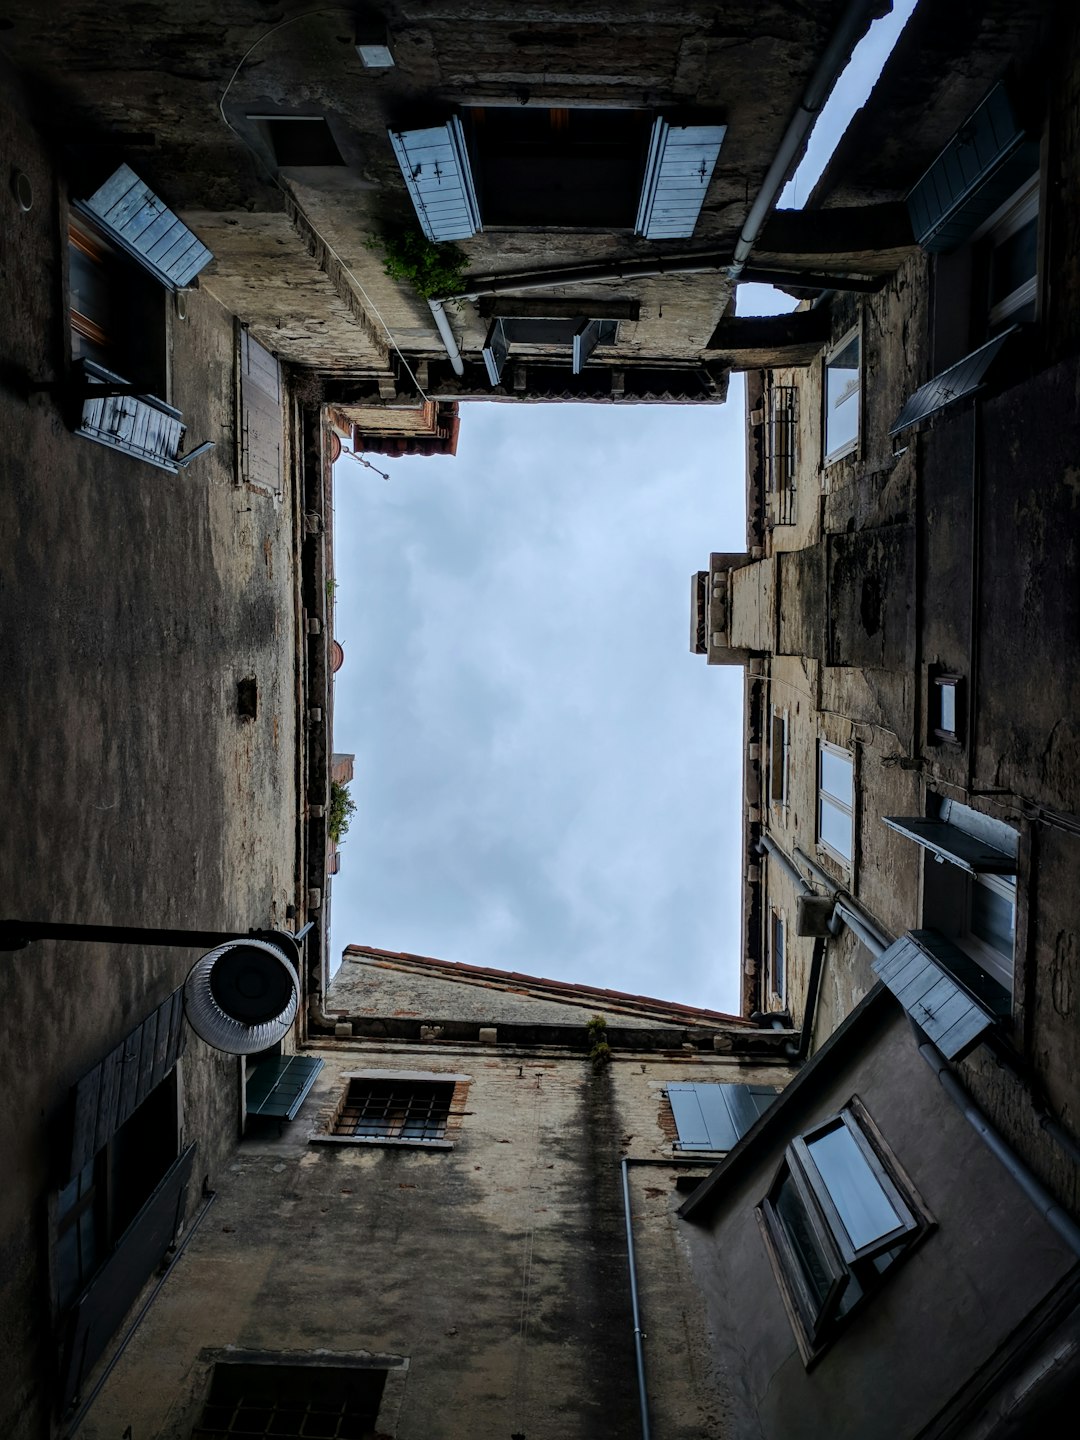 worm's eye view of a gray building